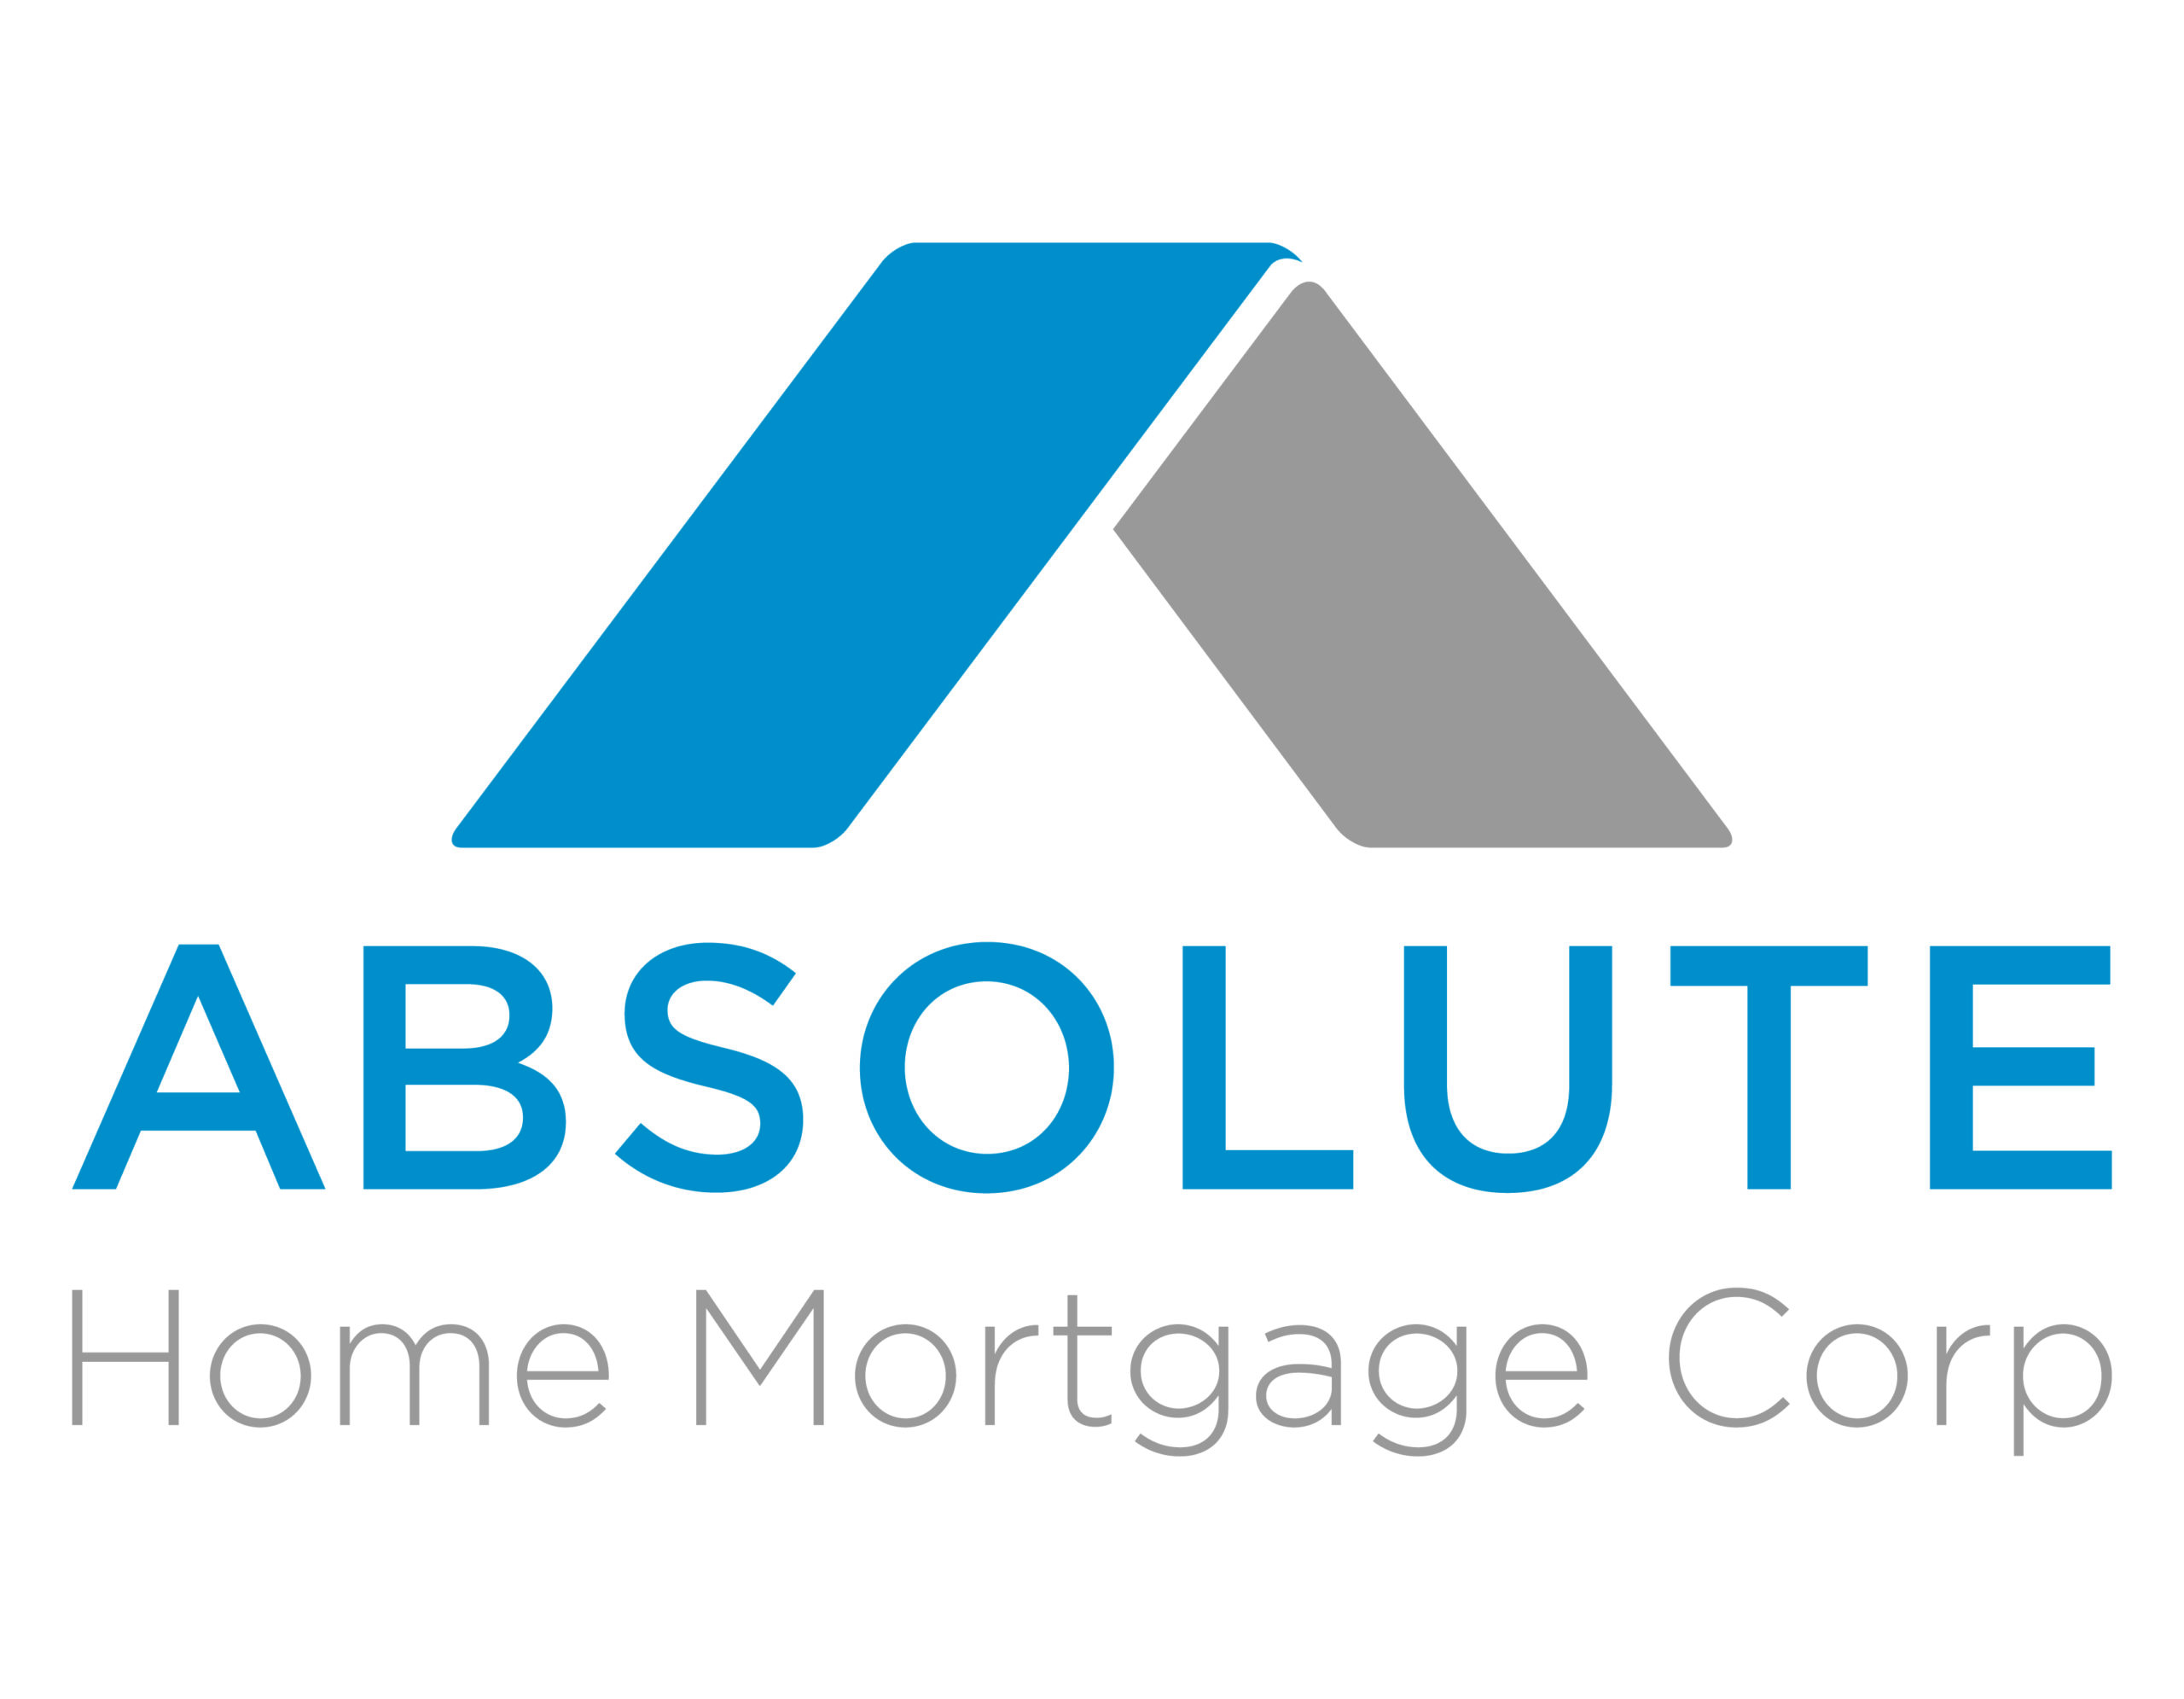 Absolute Home Mortgage